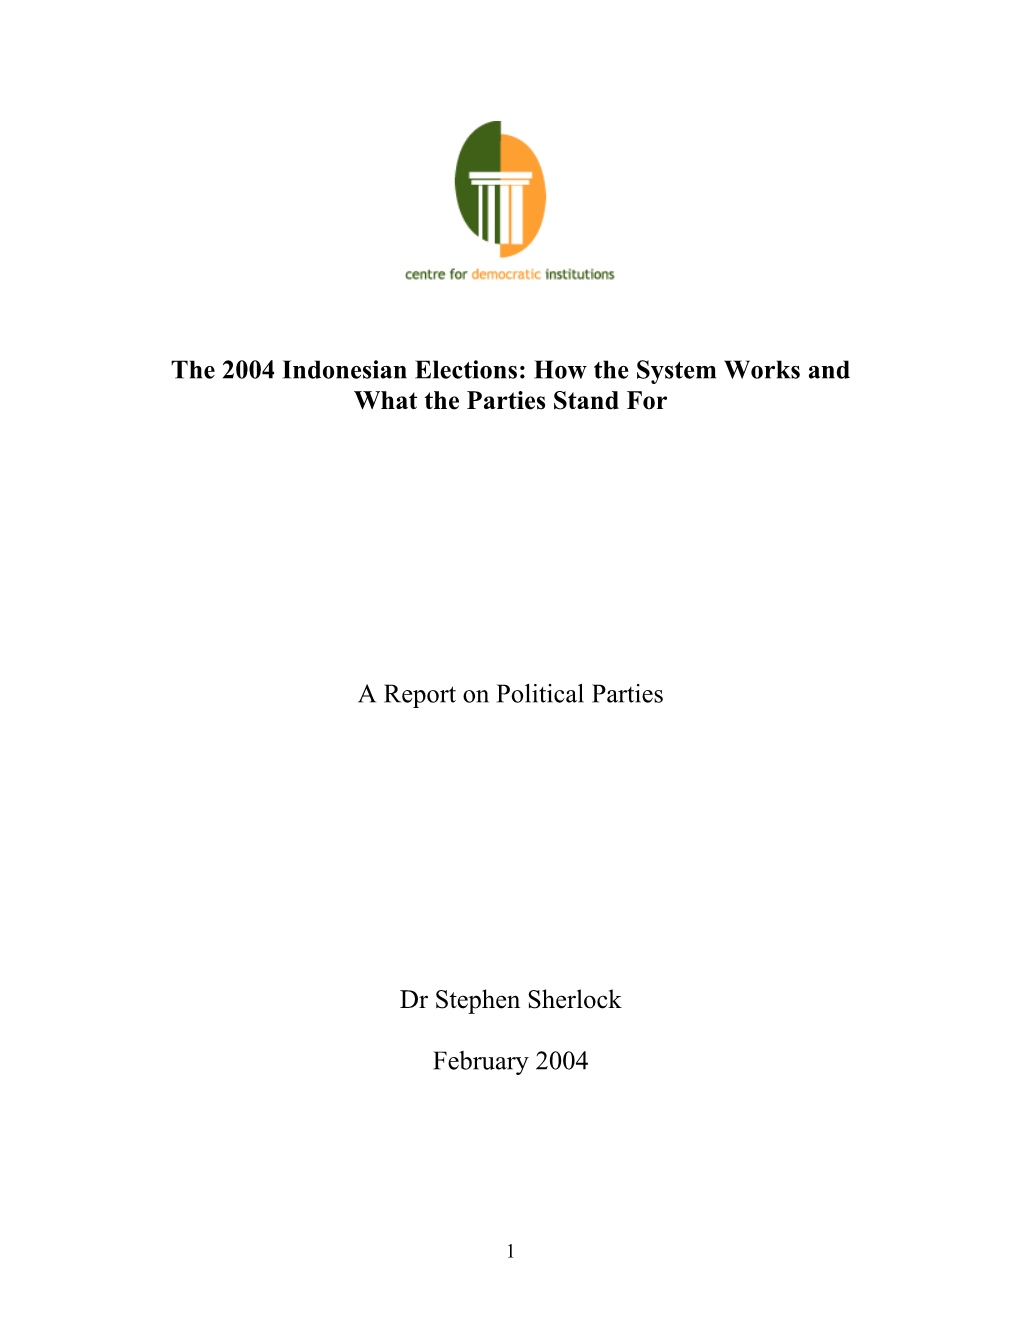 The 2004 Indonesian Elections: How the System Works and What the Parties Stand For